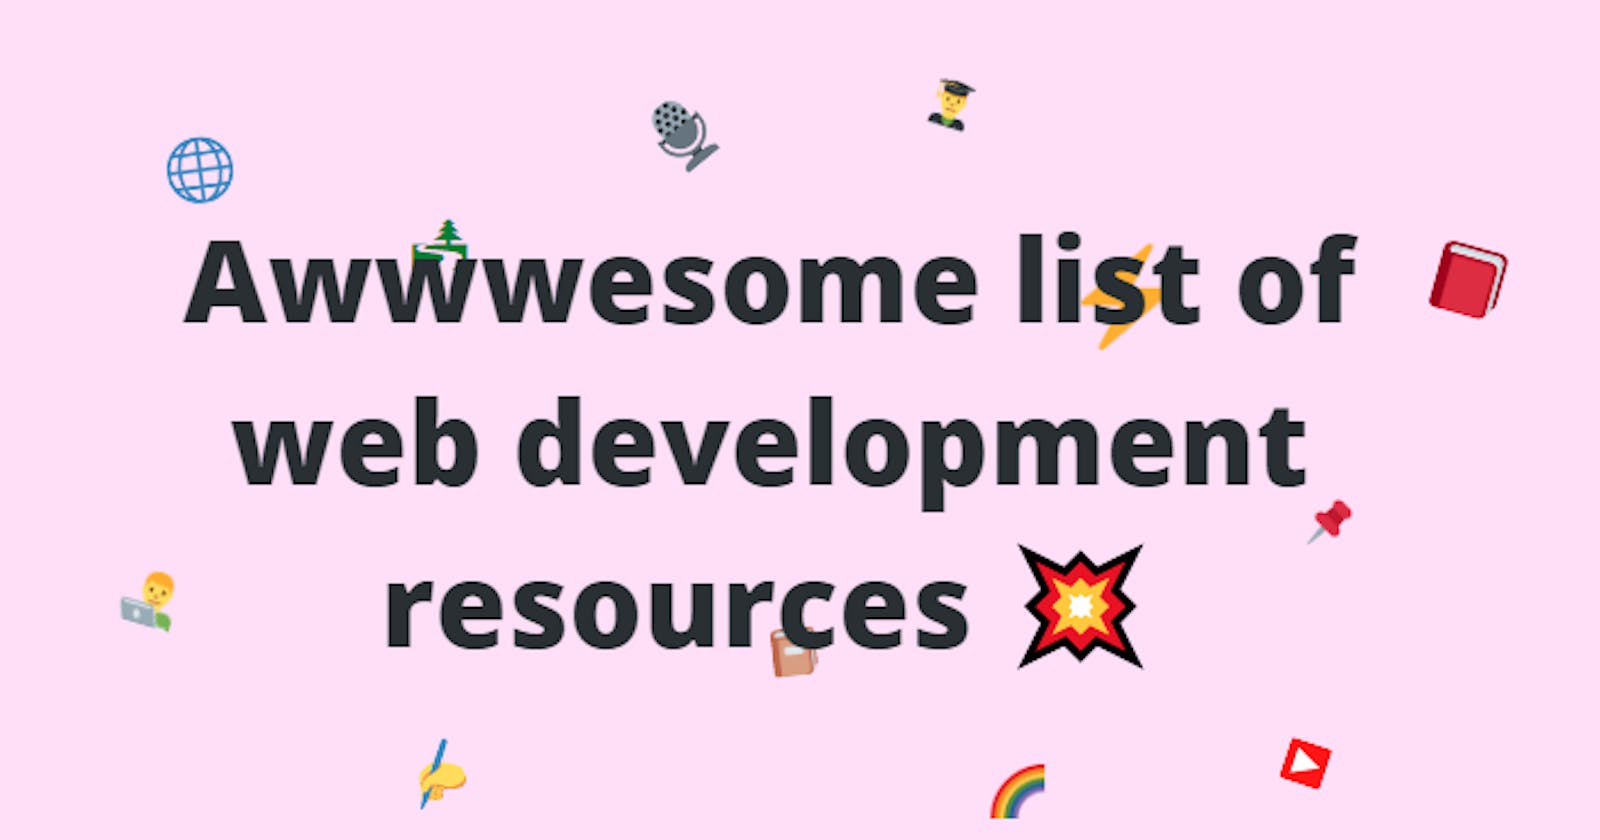 Awwwesome list of web development resources 💥